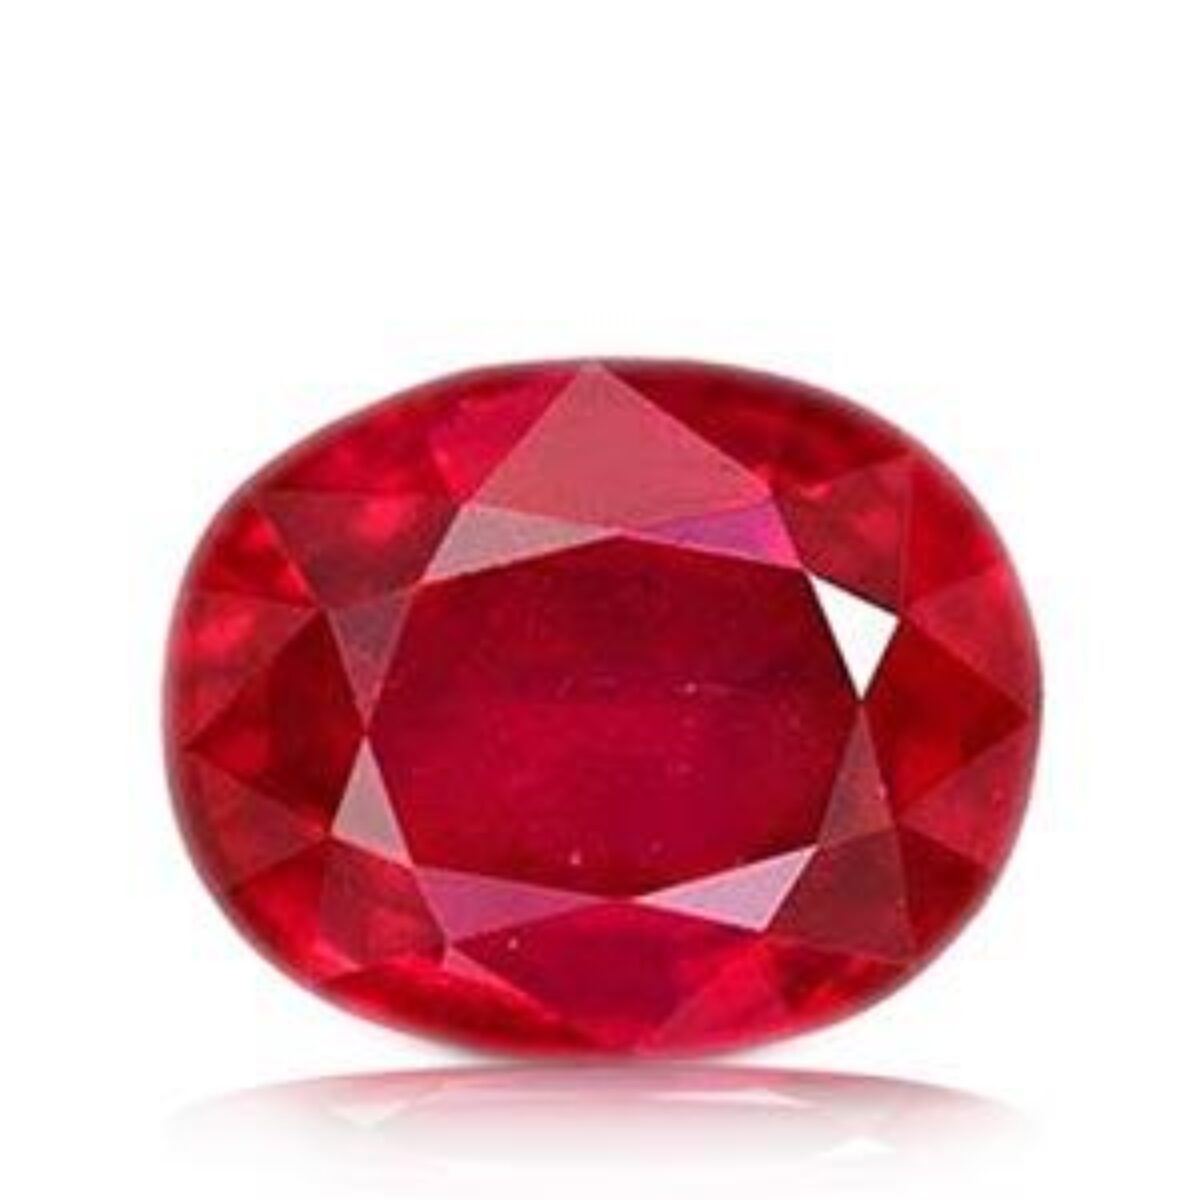 Ruby Gemstone - Powers, History, Uses And More